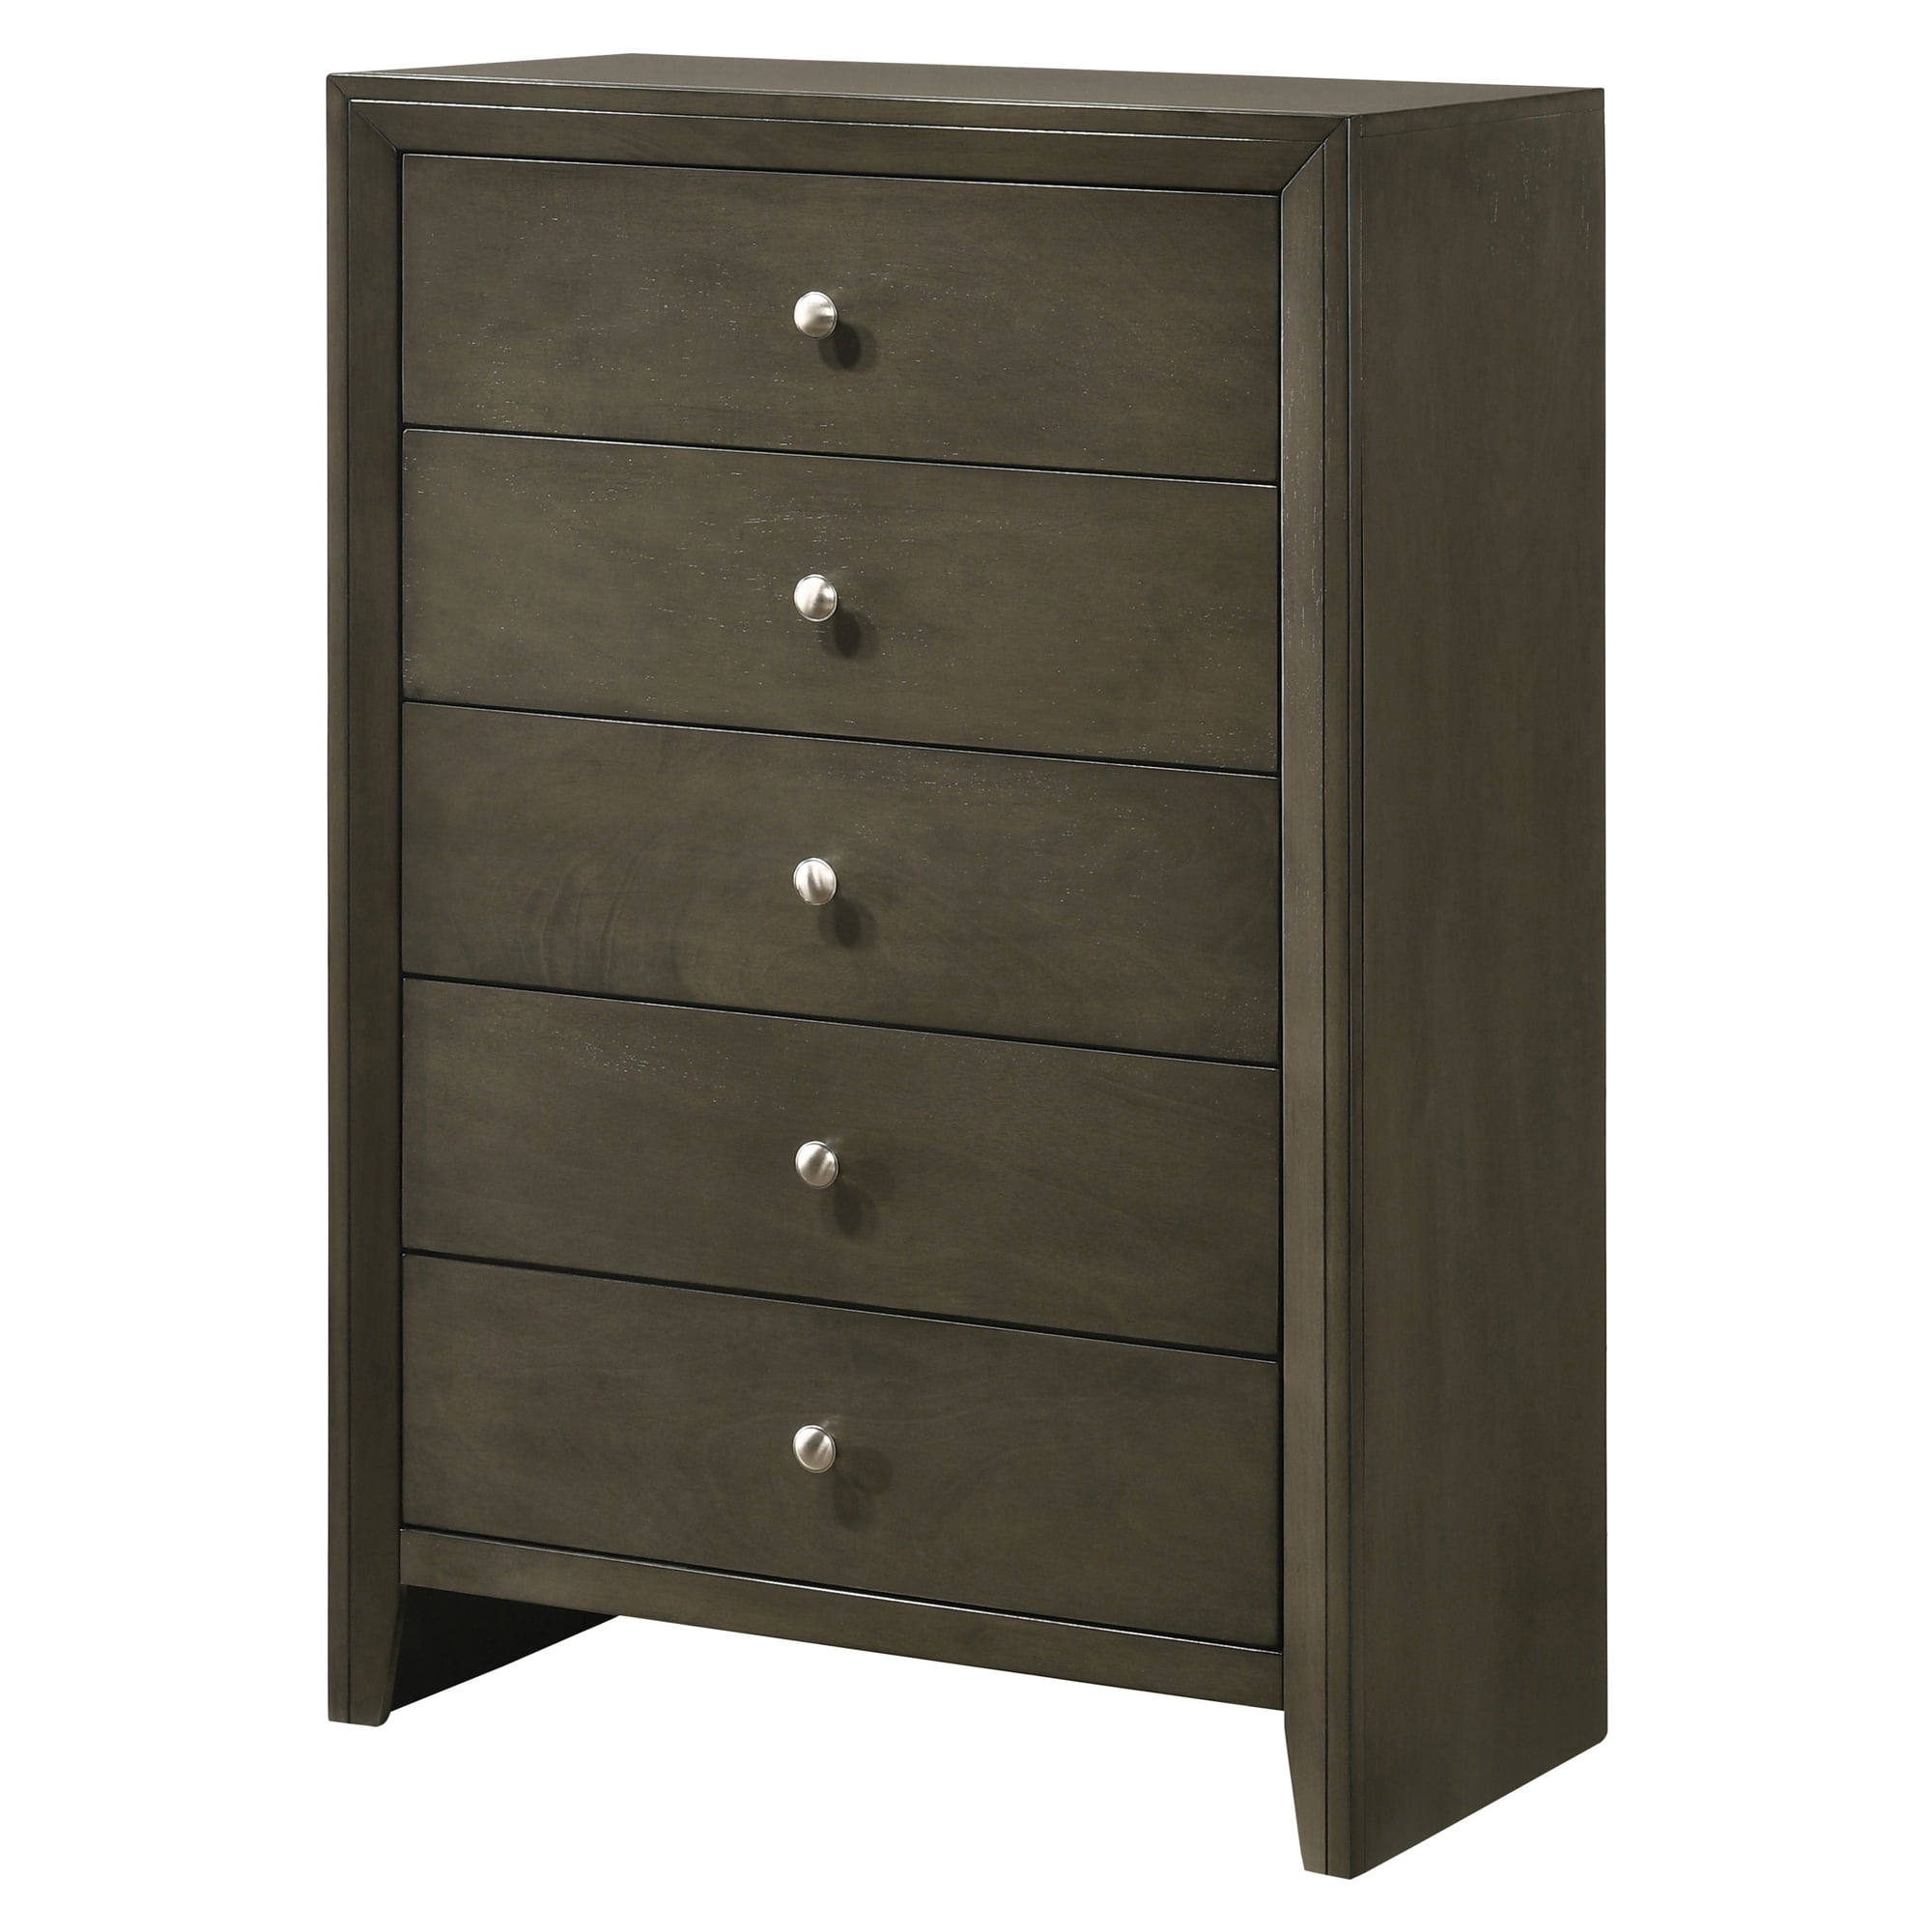 Picture of Acme Furniture 28476 31 x 16 x 47 in. Ilana Chest, Gray